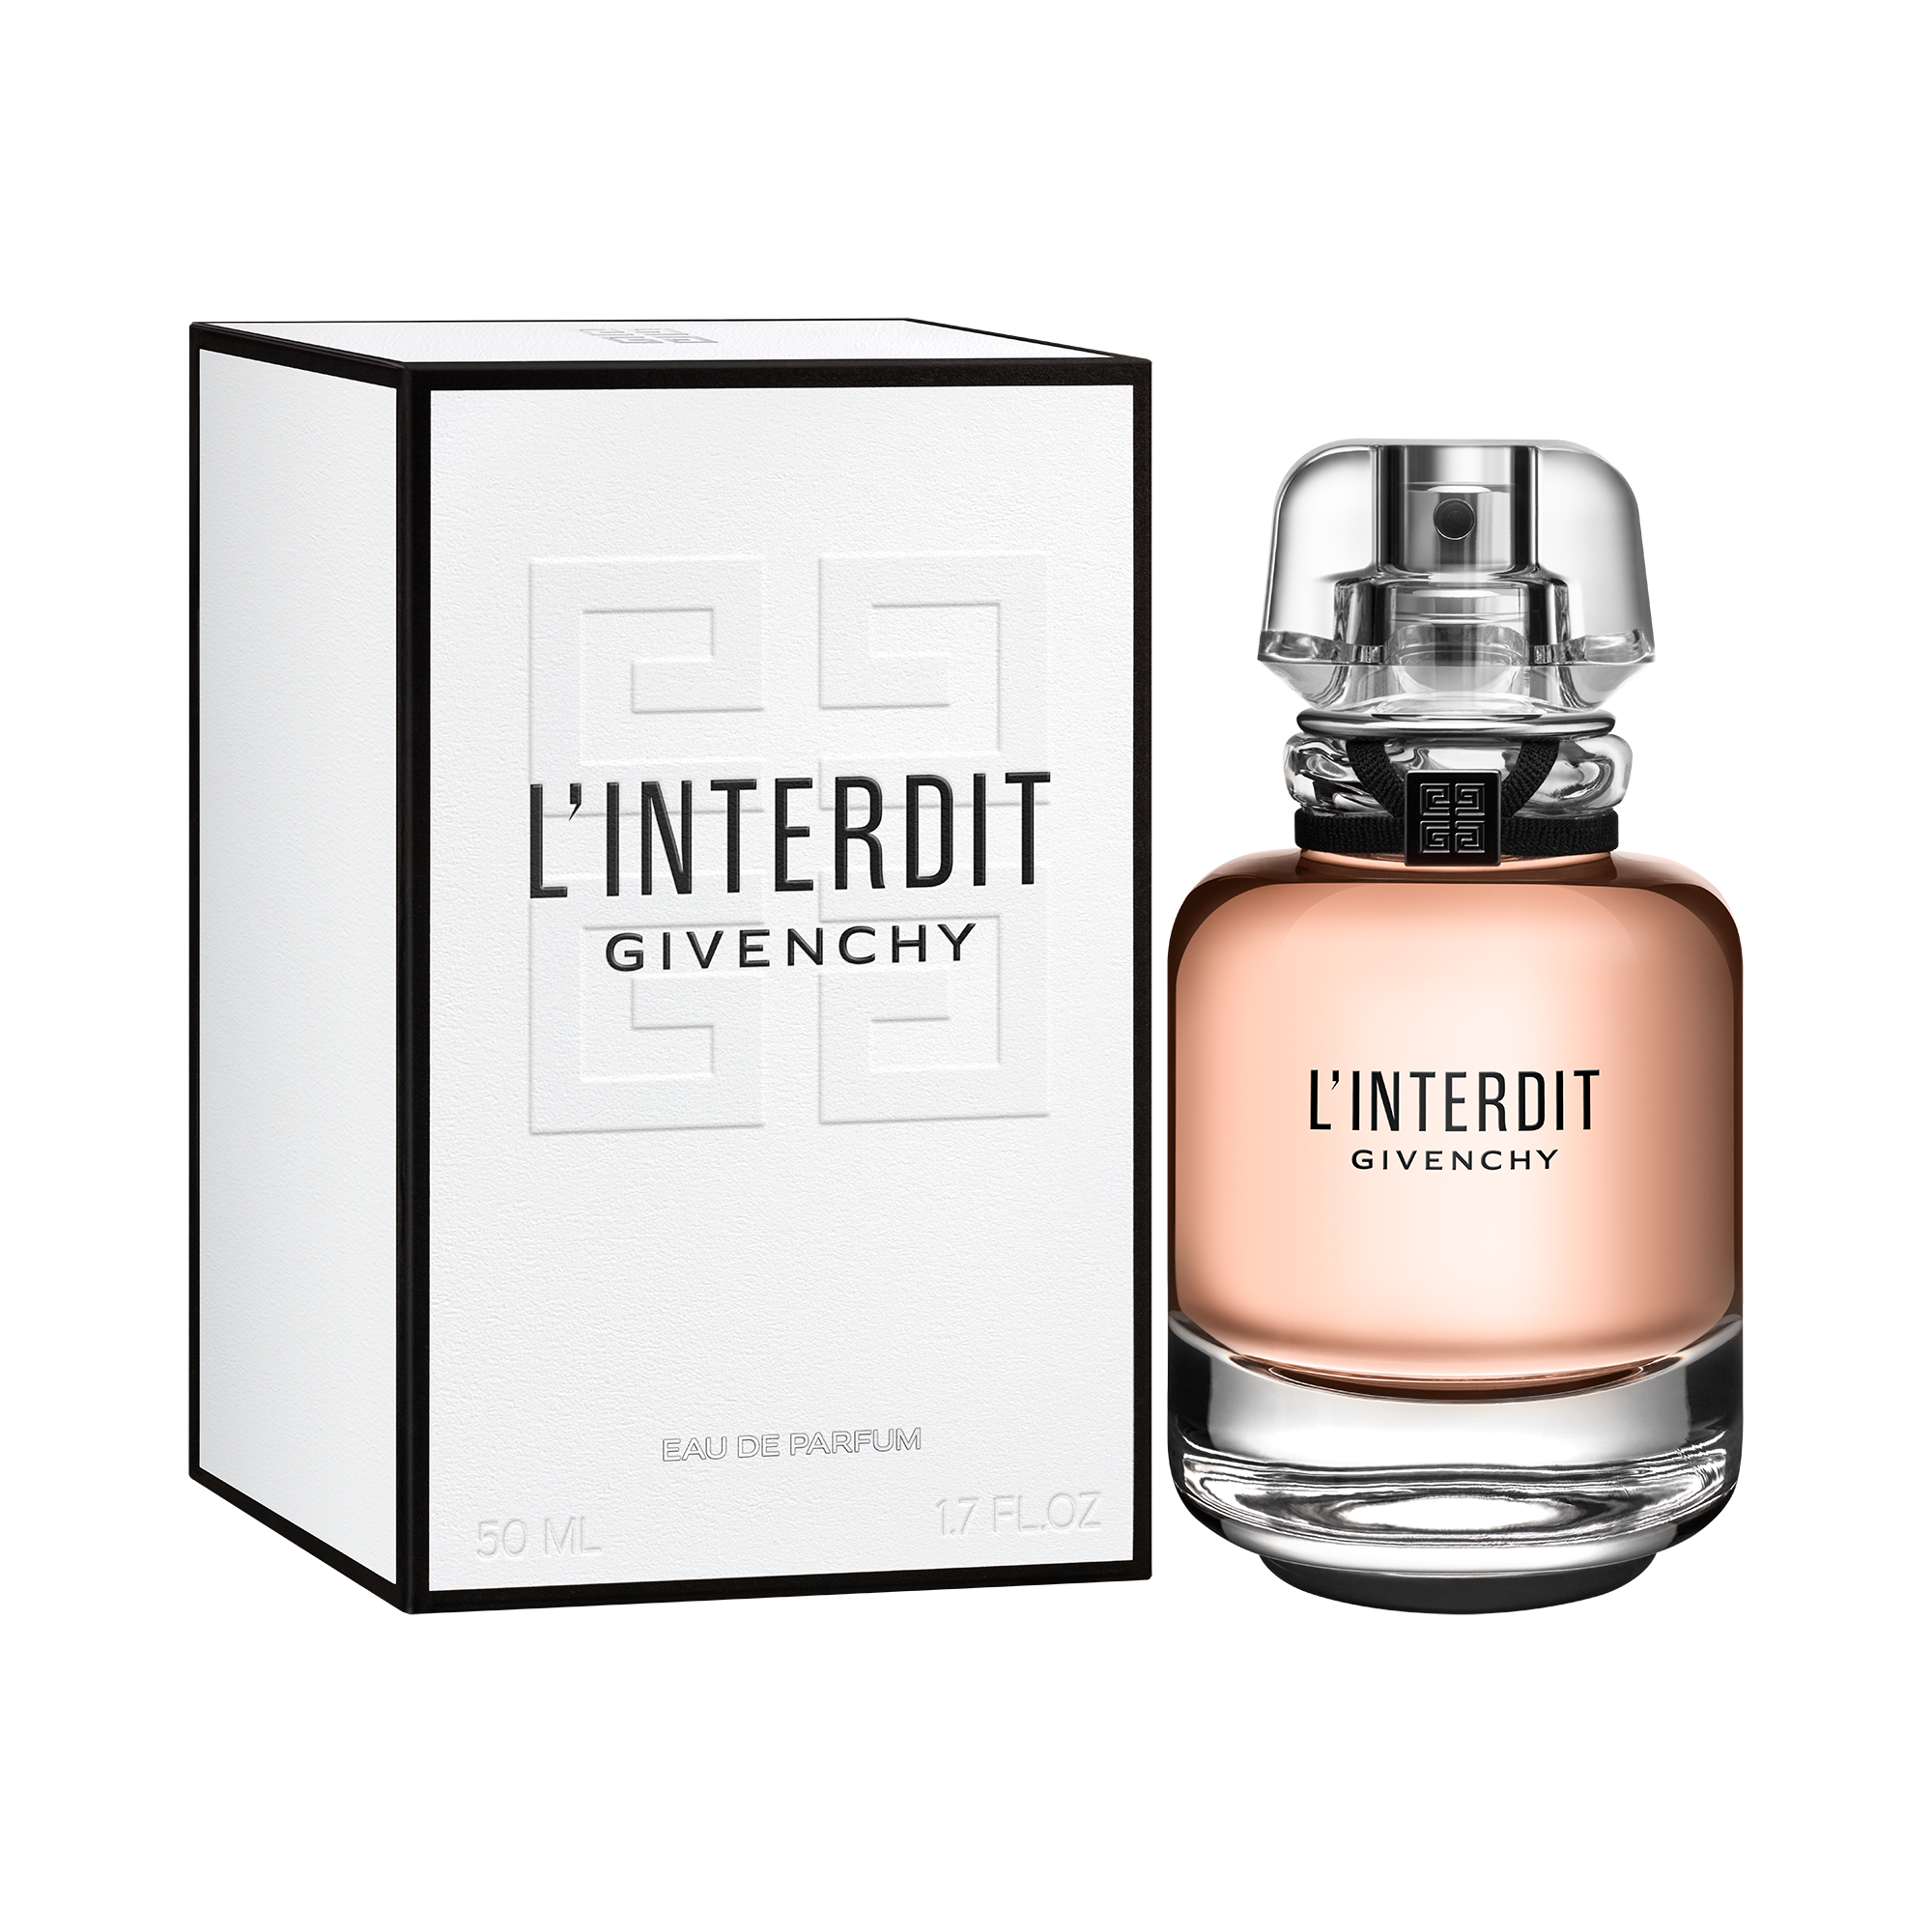 the new givenchy perfume